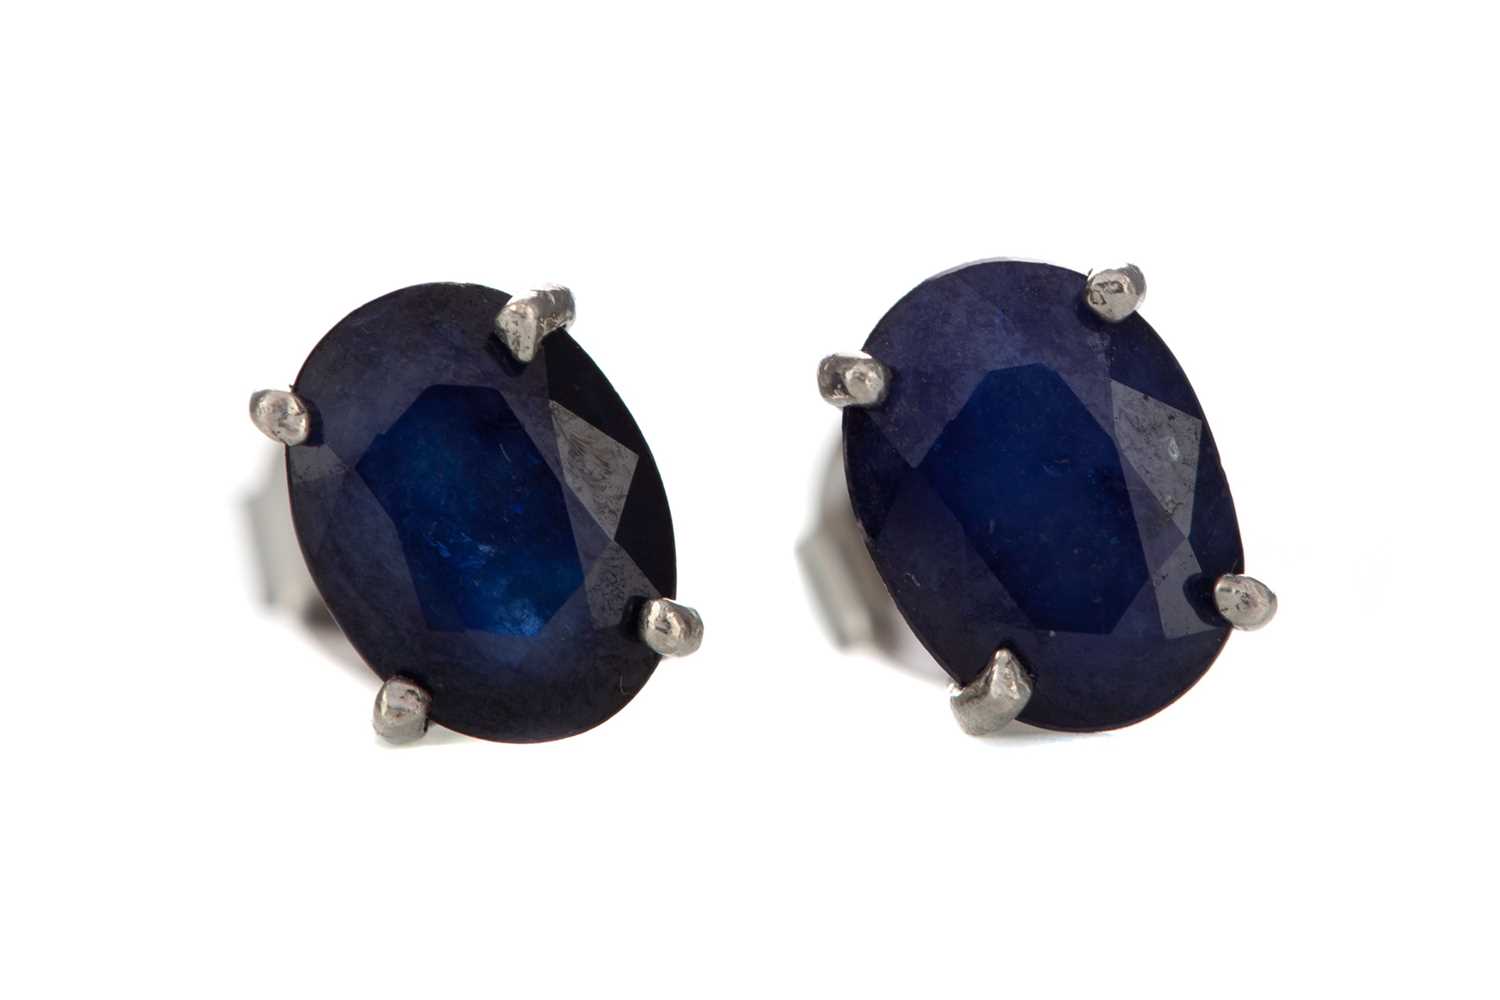 Lot 388 - A PAIR OF TREATED SAPPHIRE EARRINGS